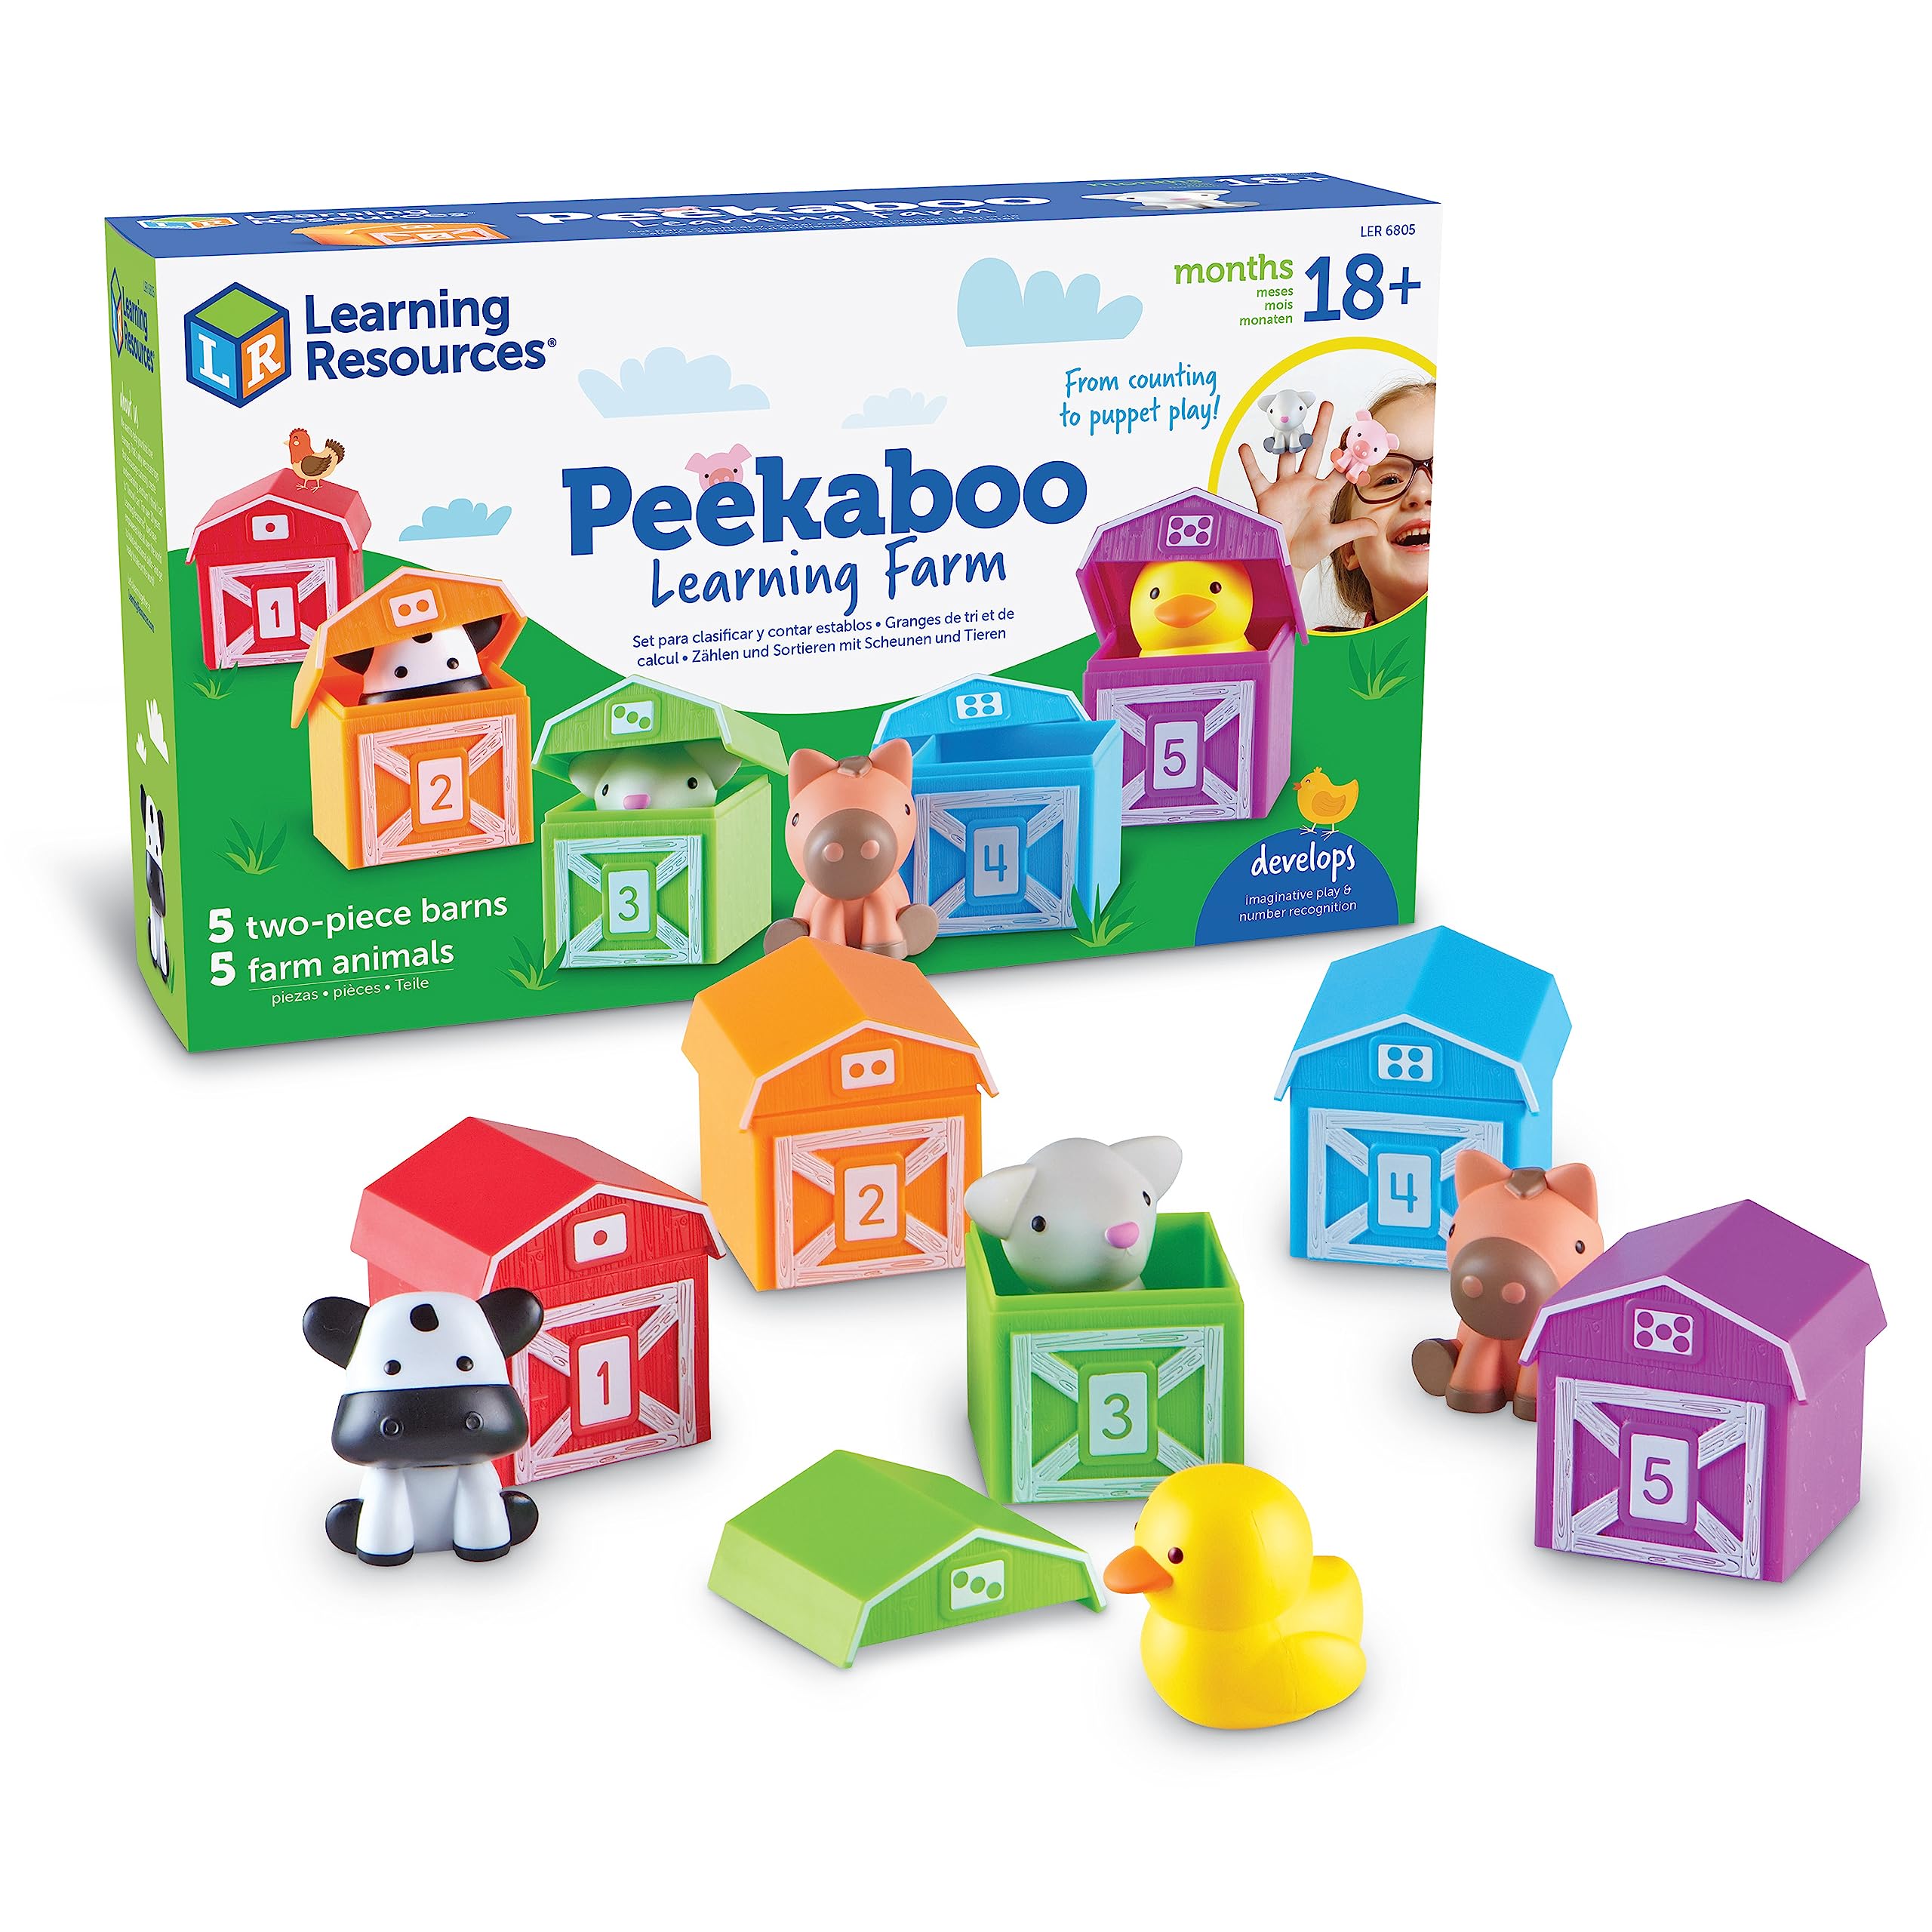 Learning Resources Peekaboo Learning Farm - 10 Pieces, Ages 18+ months Toddler Learning Toys, Counting and Sorting Toys, Farm Animals Toys,Back to School